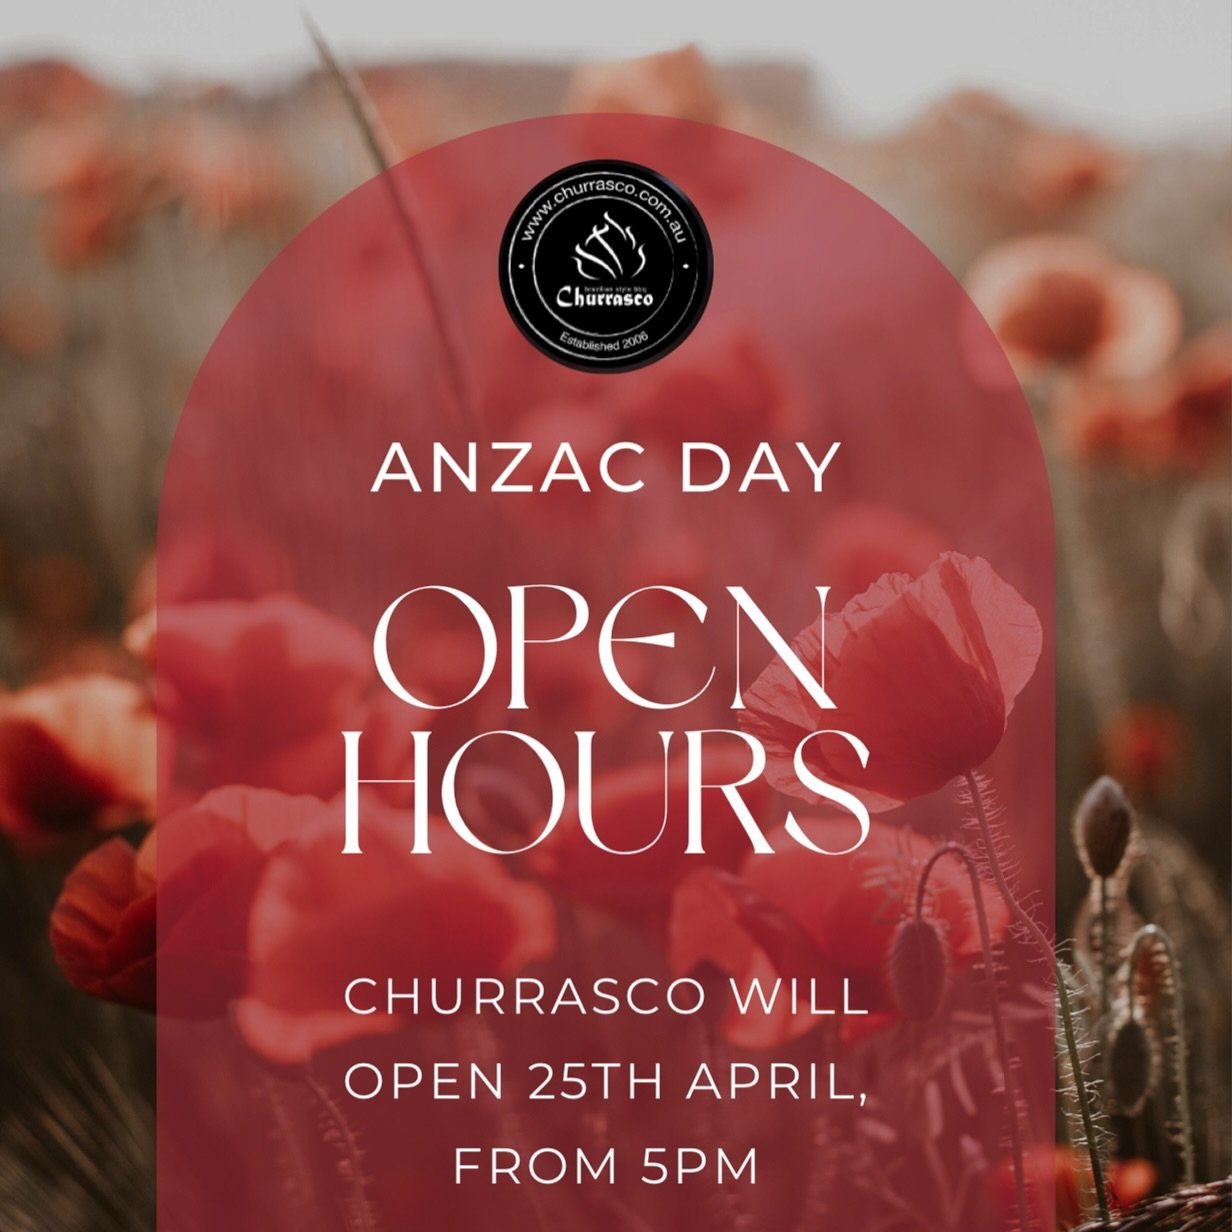 &ldquo;Lest we forget.&rdquo; Join us for an early dinner at Churrasco. Happy hour drinks from 5pm-6:30pm. Bookings available online via our website www.churrasco.com.au